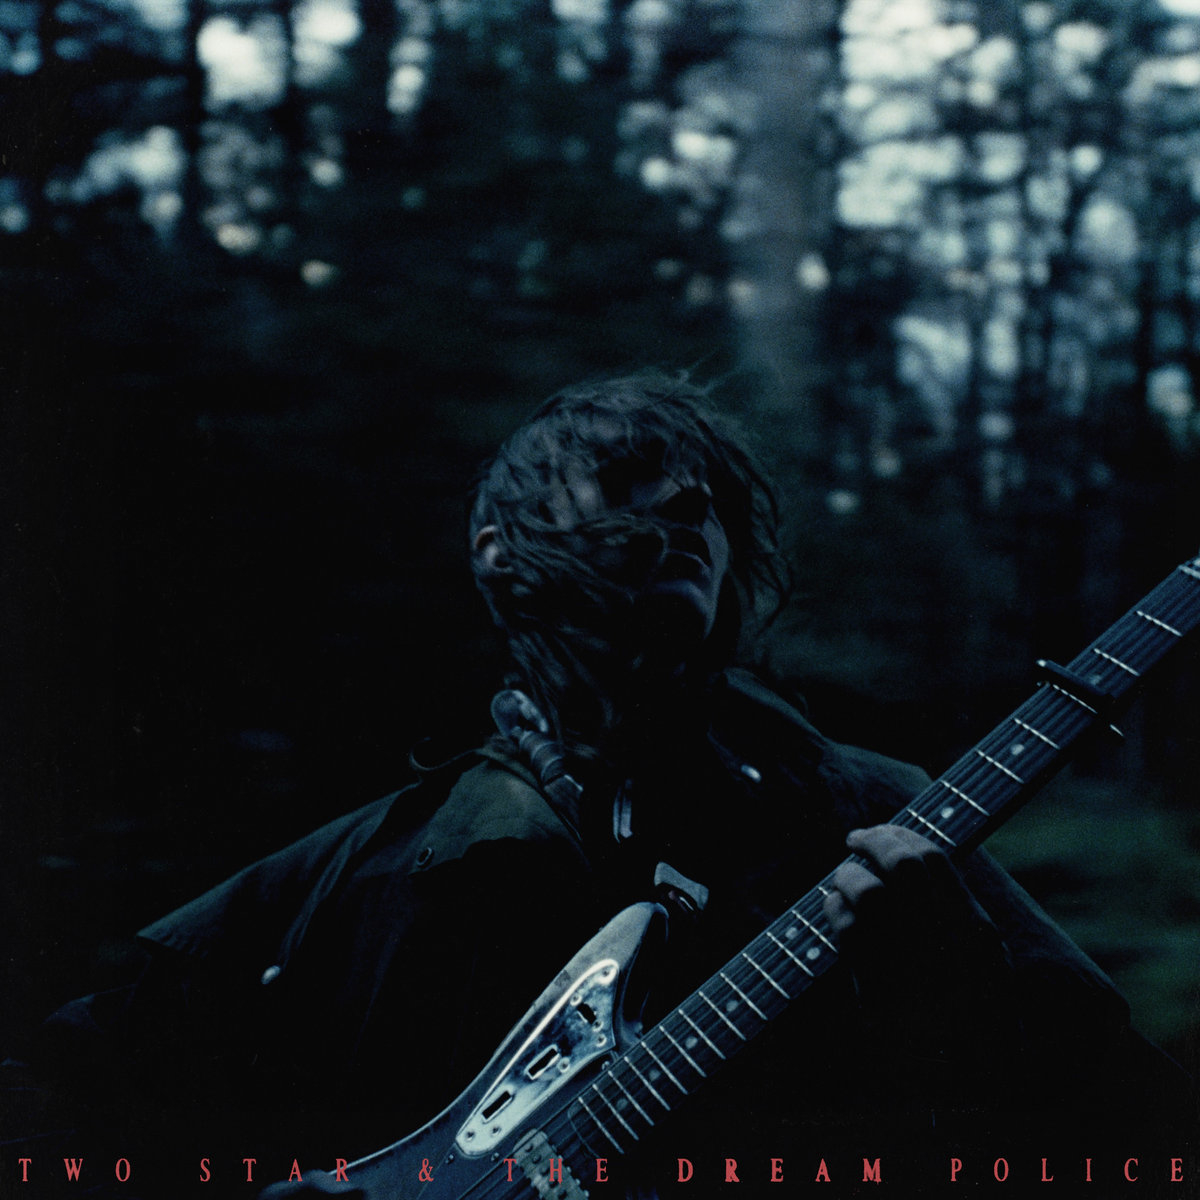 Cover art for &quot;Two Star &amp; The Dream Police&quot; featuring a musician in a forest, holding an electric guitar, with dark, moody lighting